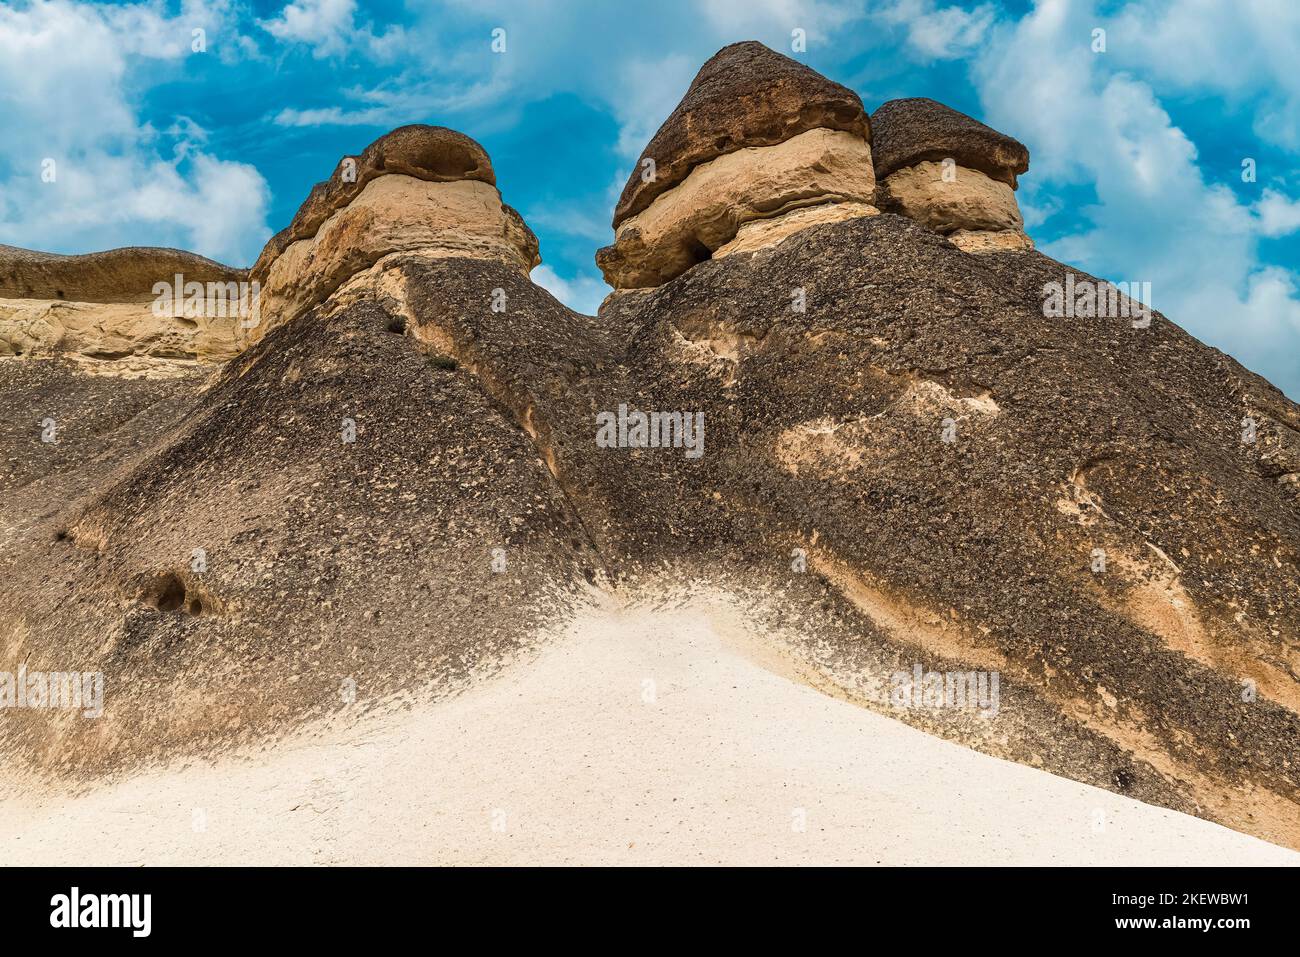 detail of rock formations in the love valley in turkey Stock Photo